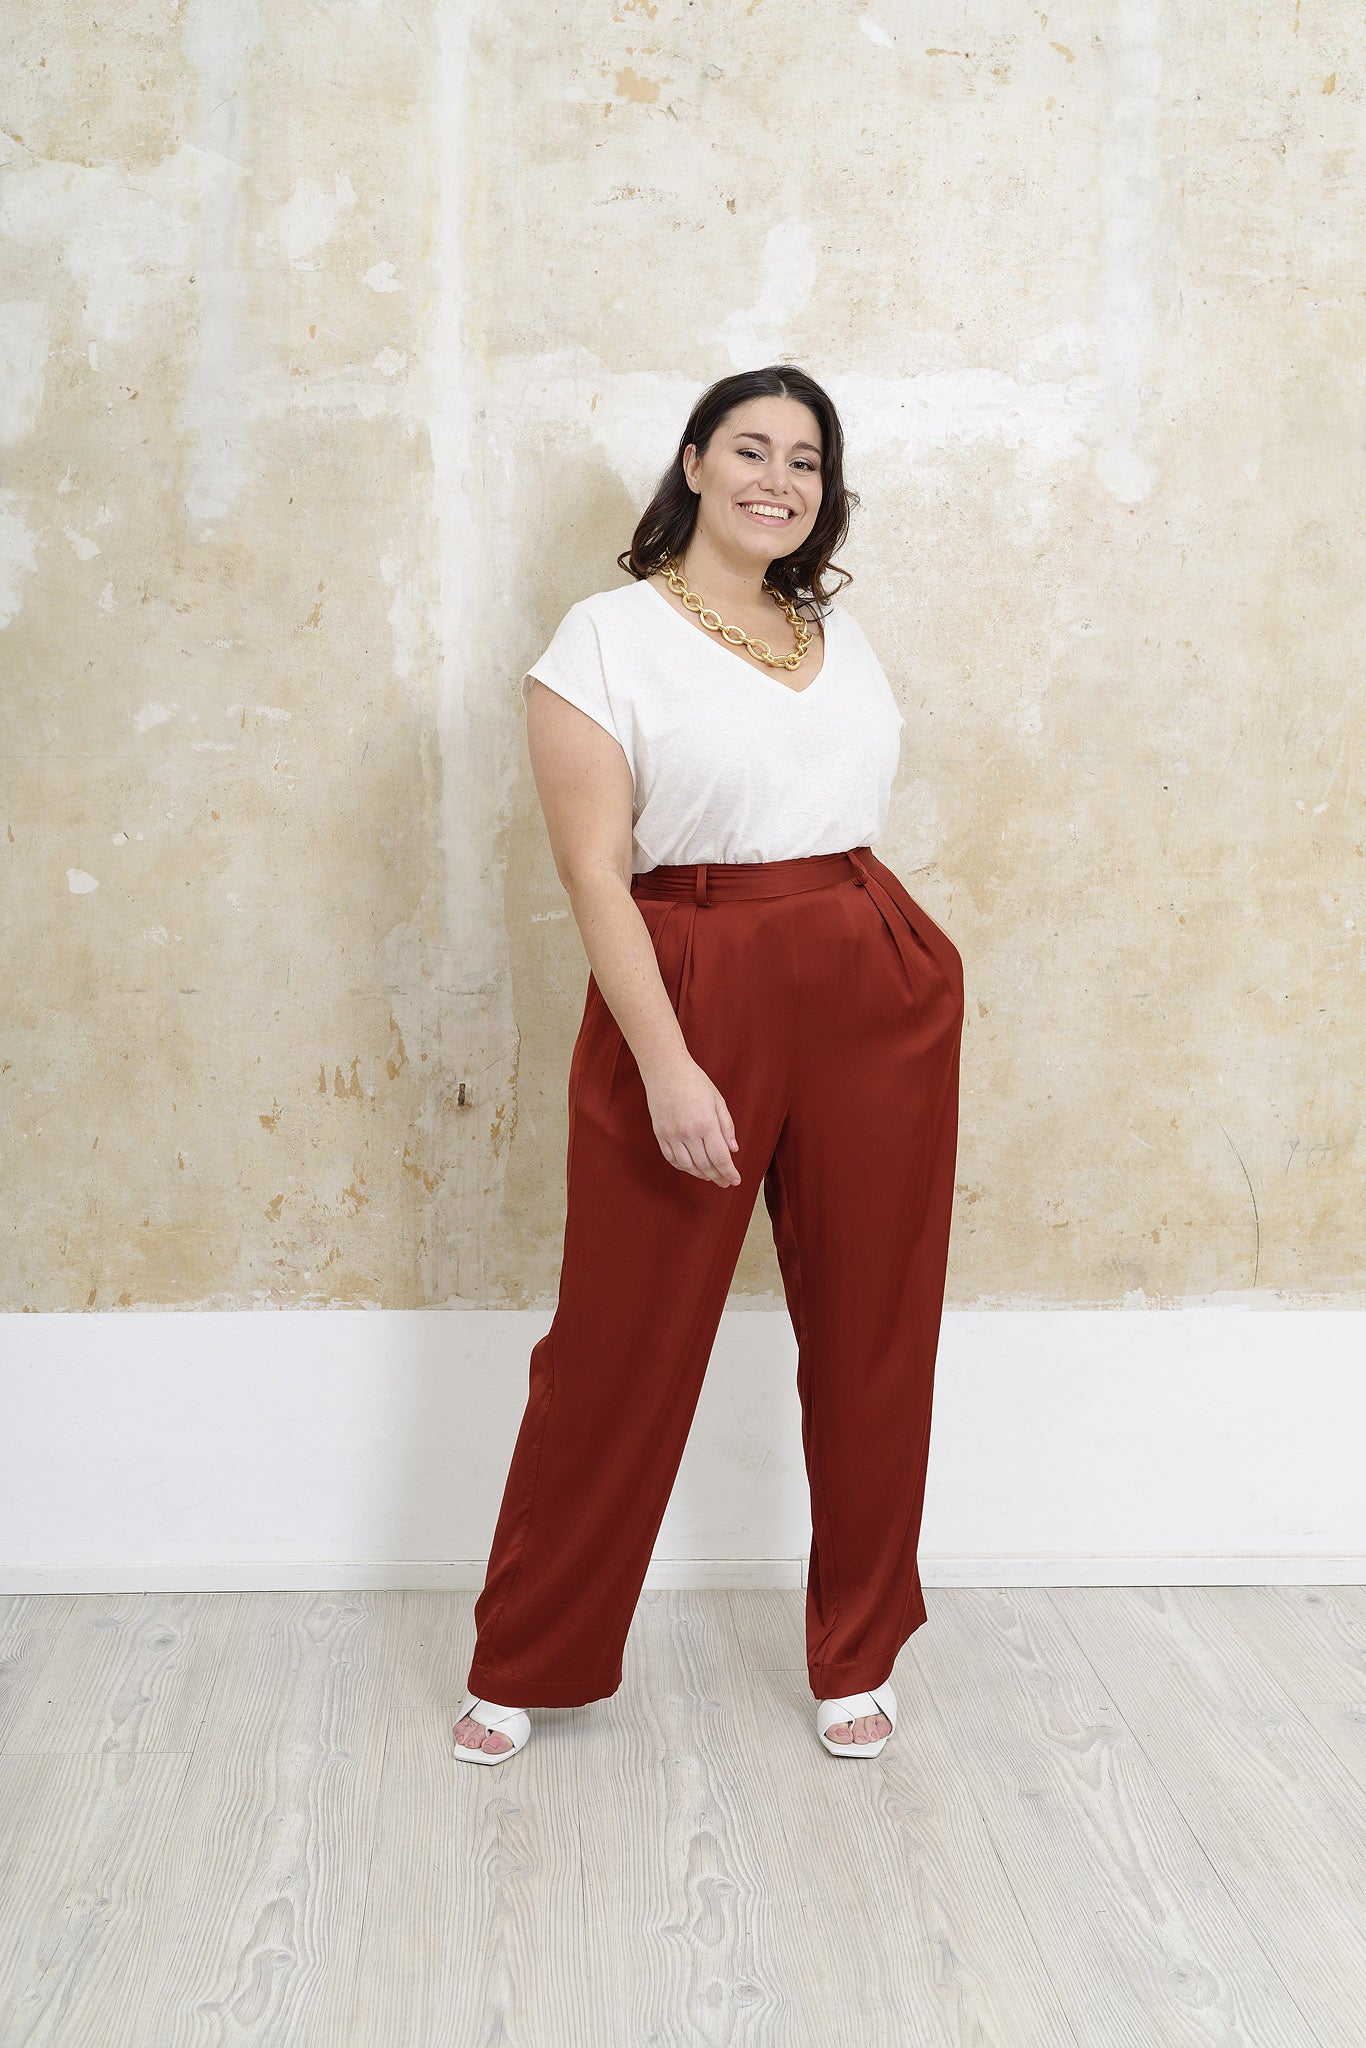 Shirt-Lilly-weisses-Tshirt-Frau-in-roter-Hose-großer-Goldschmuck-Plus-Size